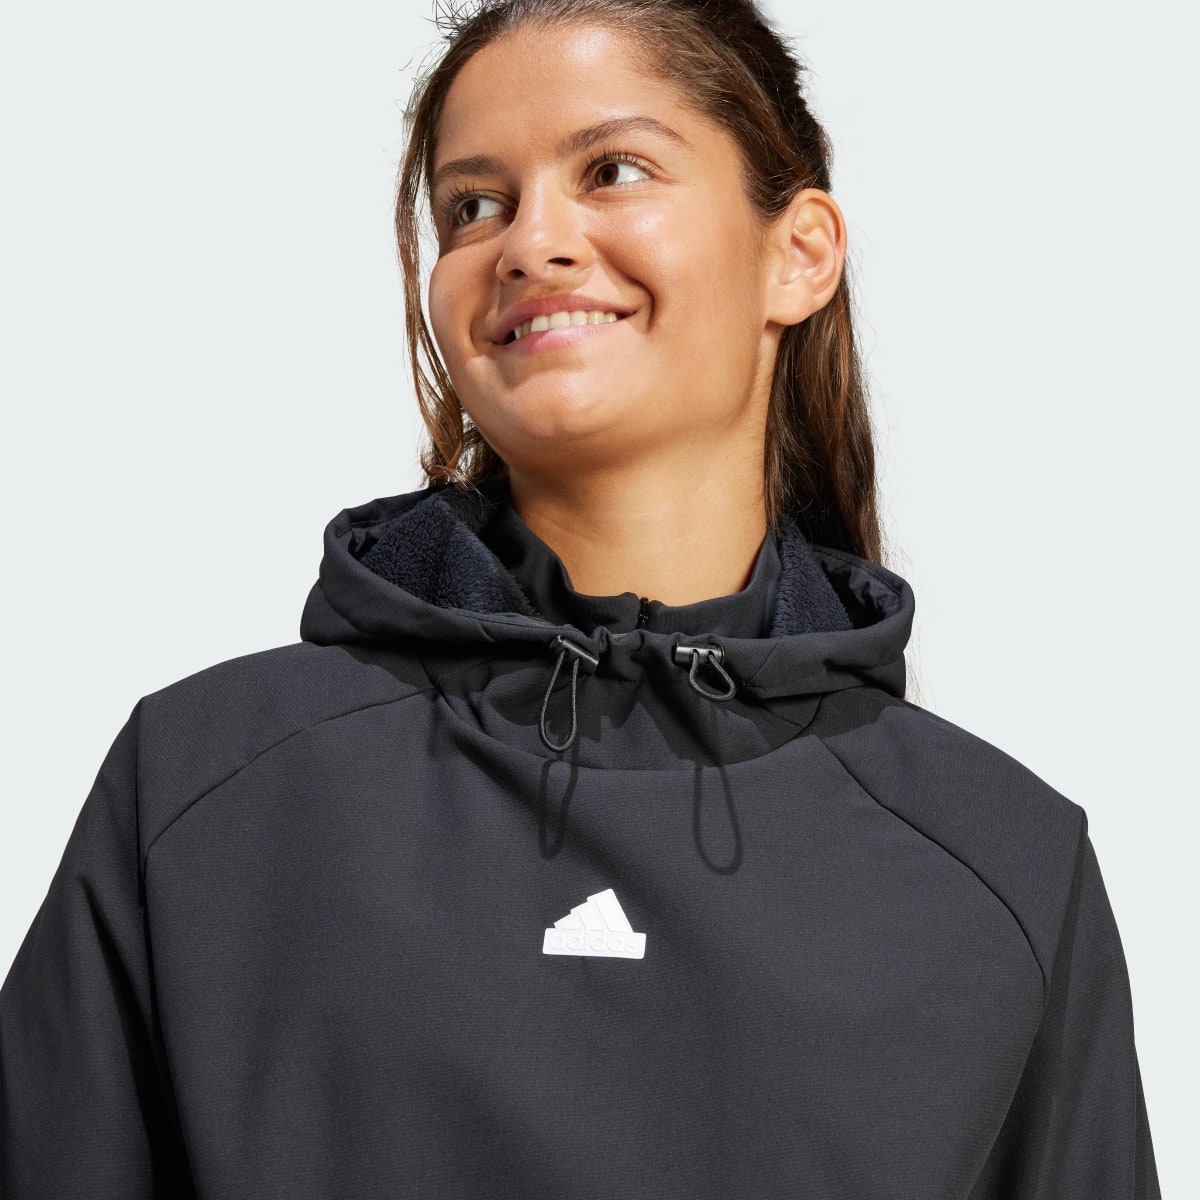 Adidas City Escape Bungee Cord Hoodie. 7